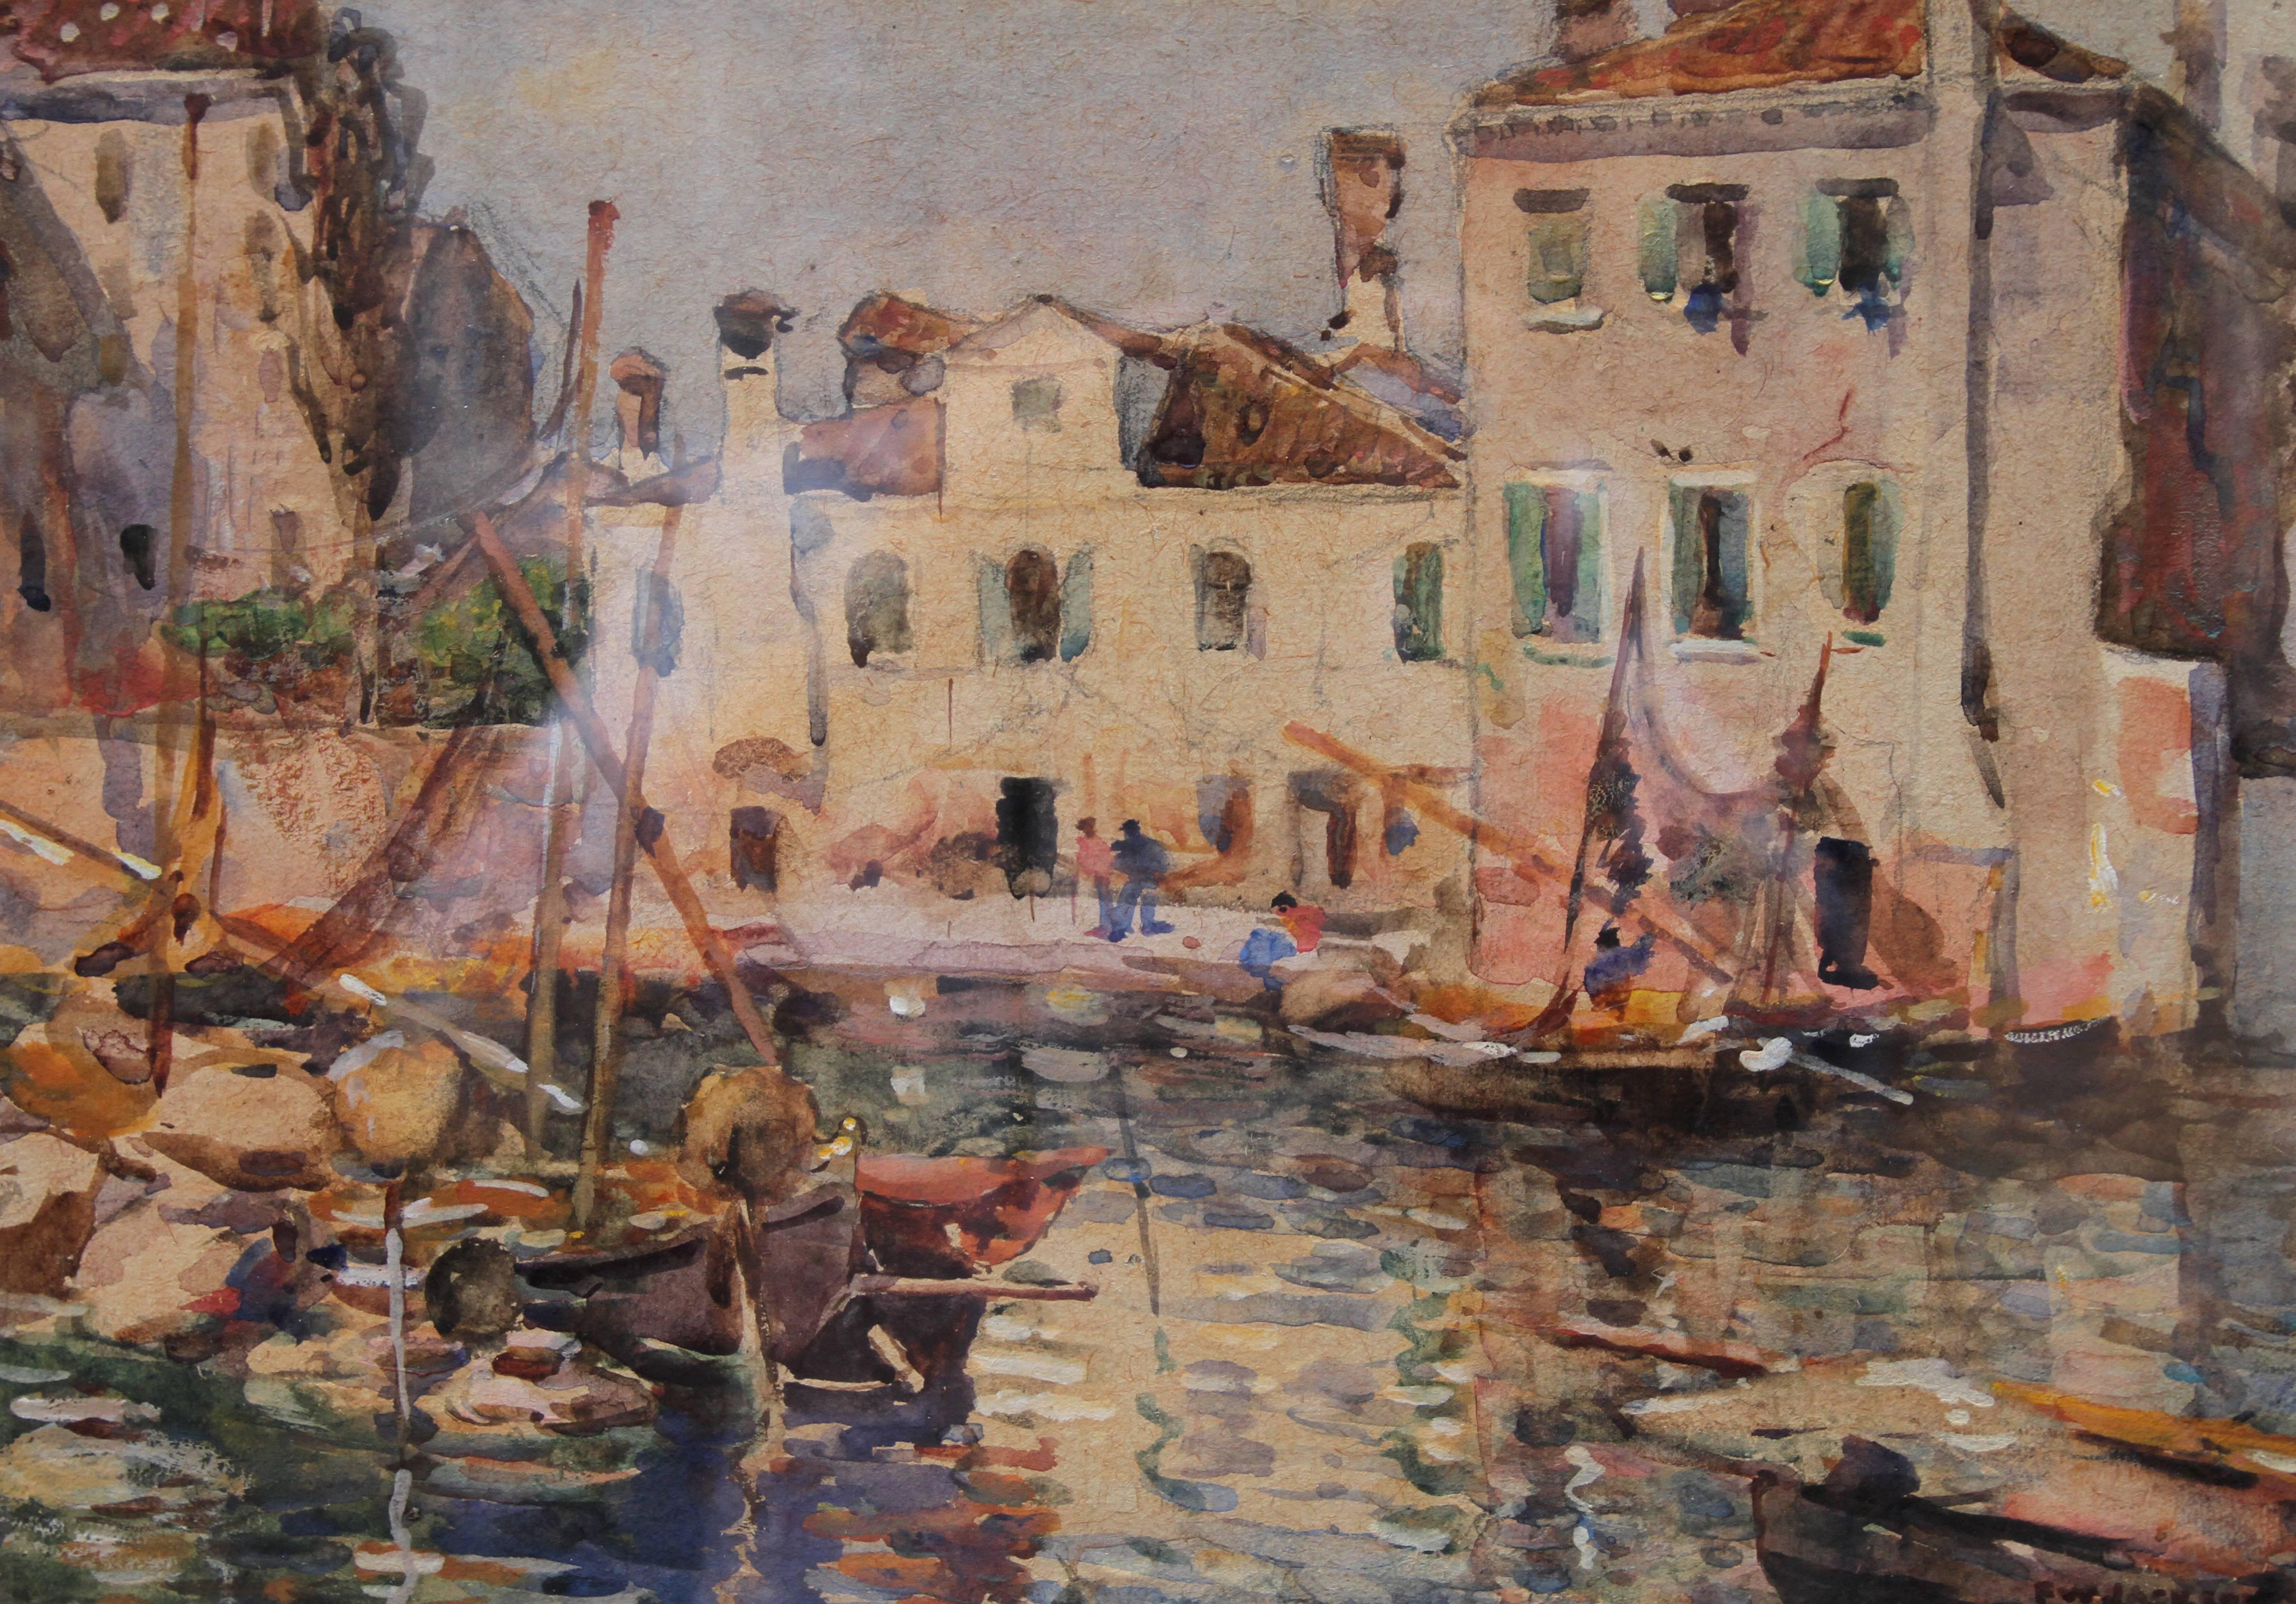 A fresh and vibrant watercolour which is signed and dated to circa 1890 by Frederick William Jackson - the Yorkshire Staithes Impressionist who travelled in Europe in the 19th century. It depicts fishing boats in Venice and is in excellent